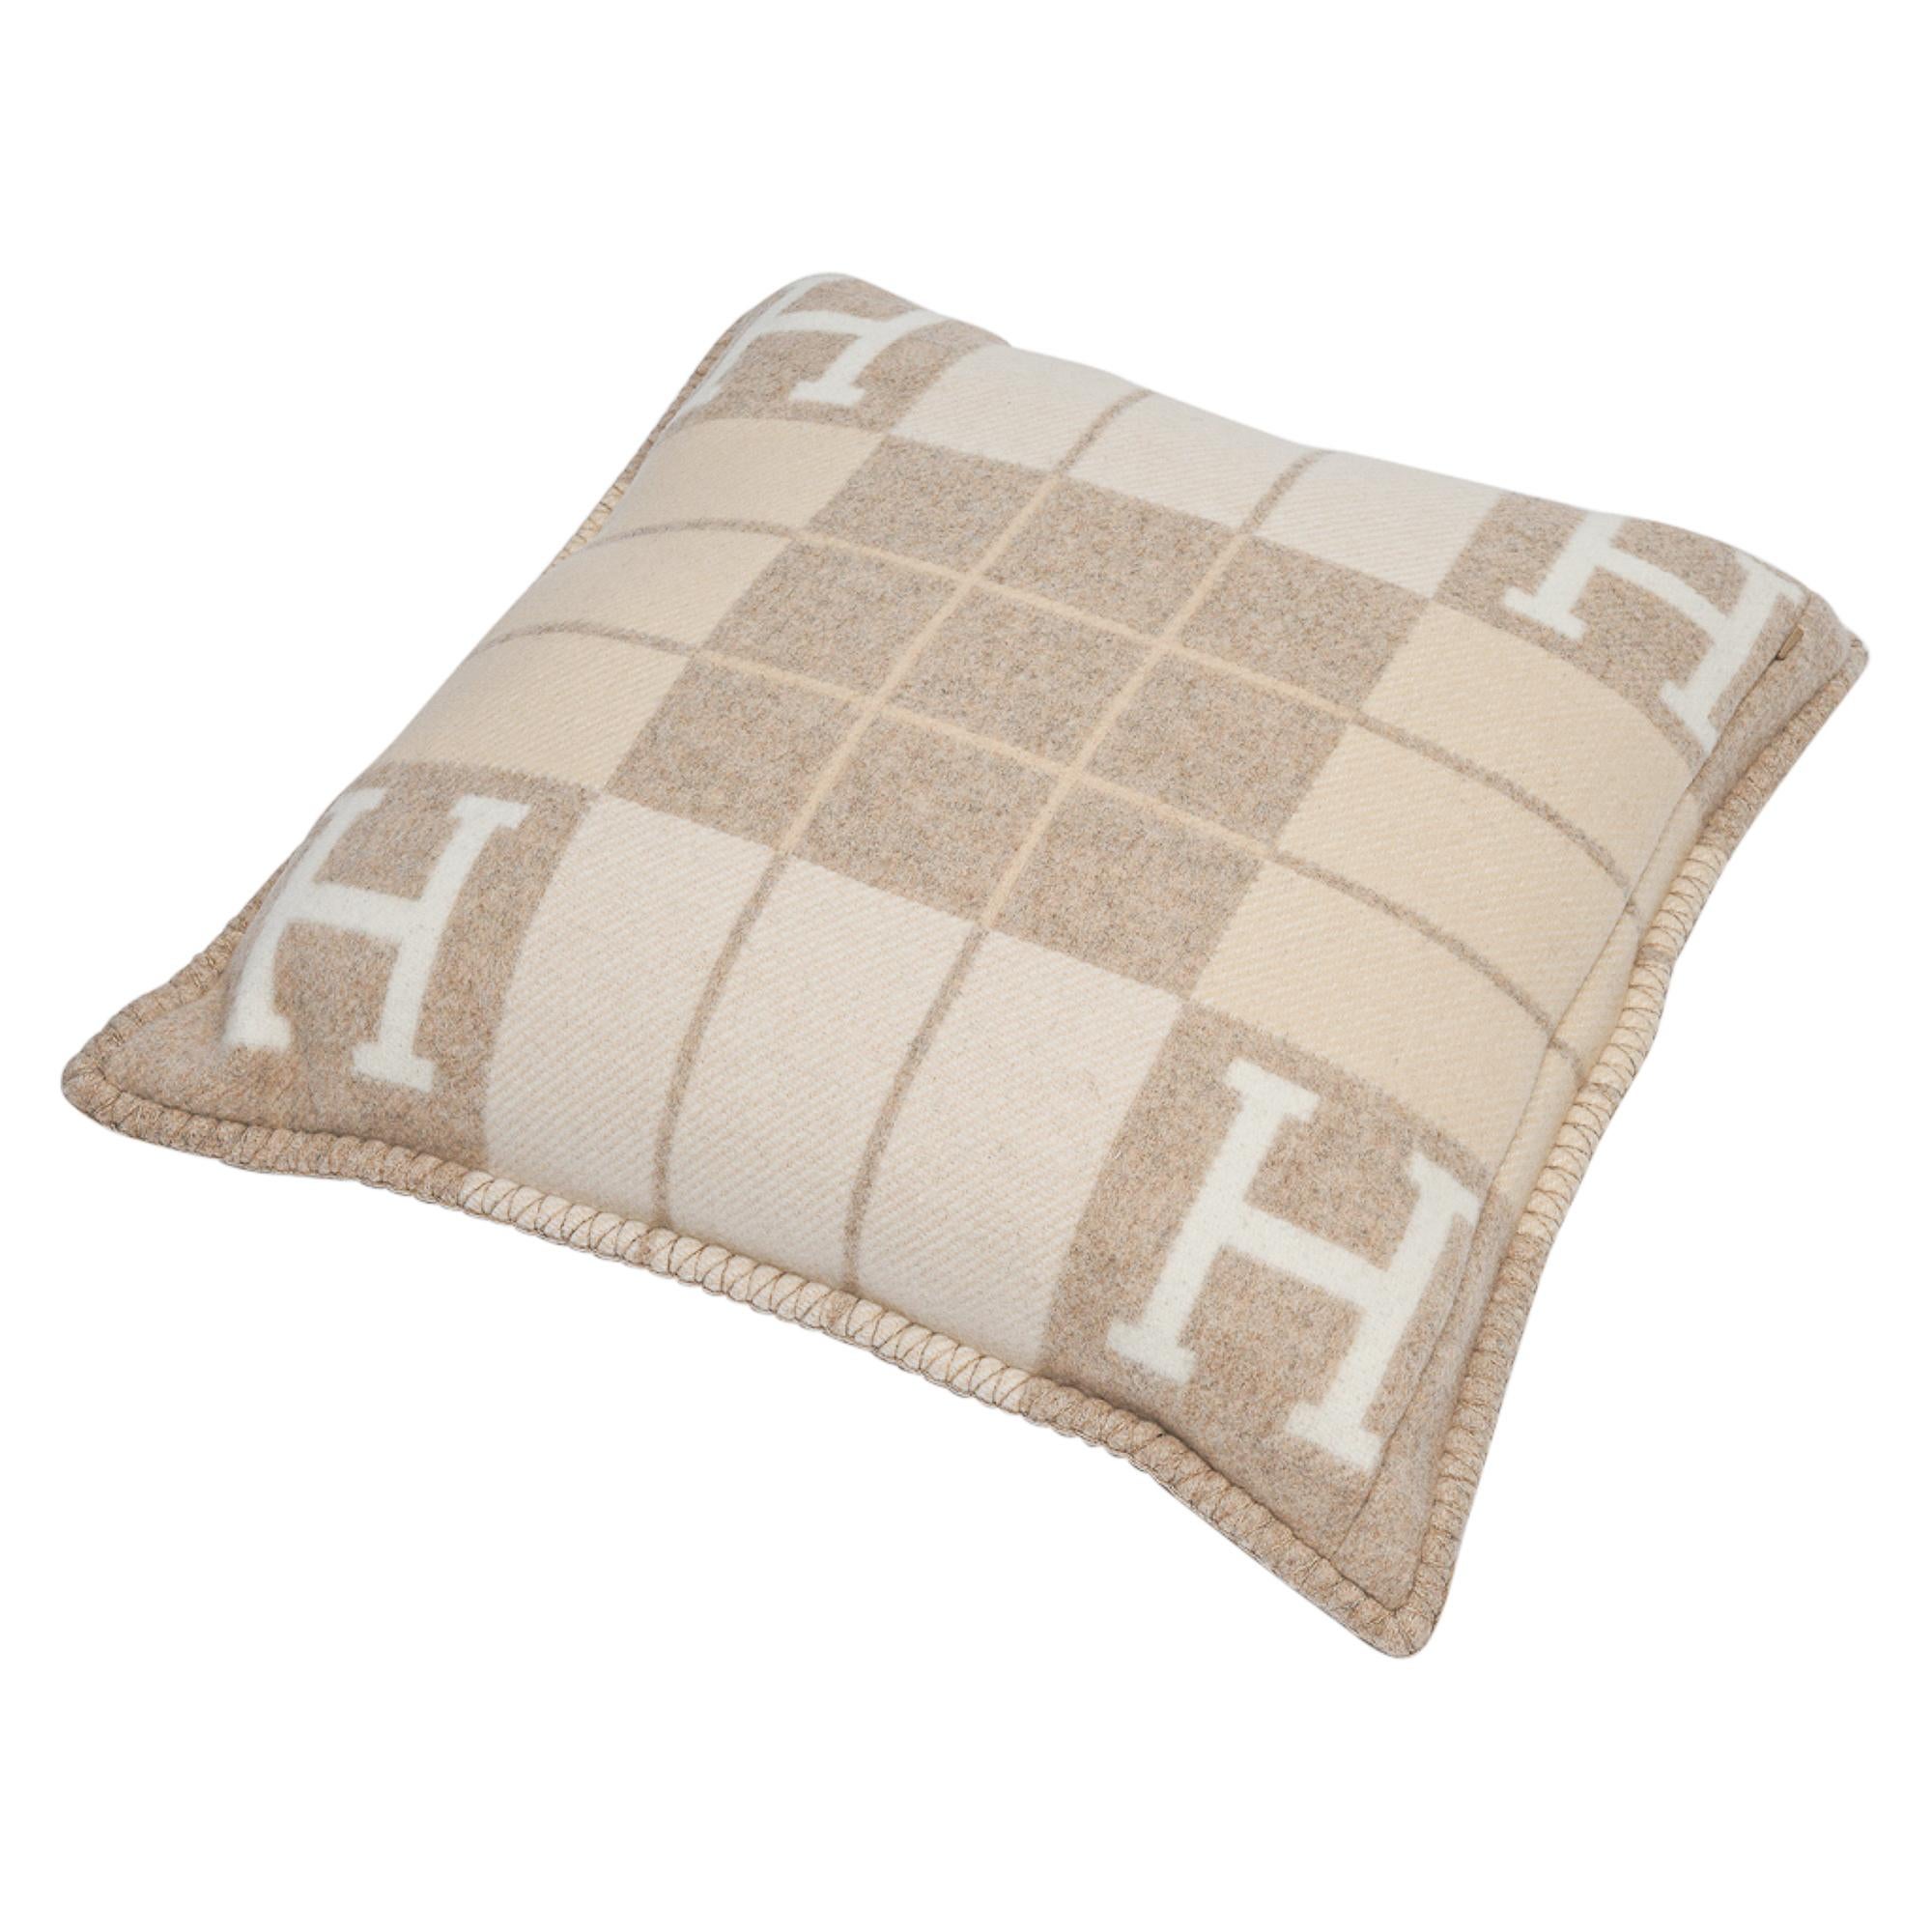 Mightychic offers a set of two (2) Hermes classic PM Avalon III signature H pillow Coco and Camomille.
The removable cover is created from 85% Wool and 15% cashmere and has whip stitch edges.
Comes with sleeper.
New or Pristine Store Fresh